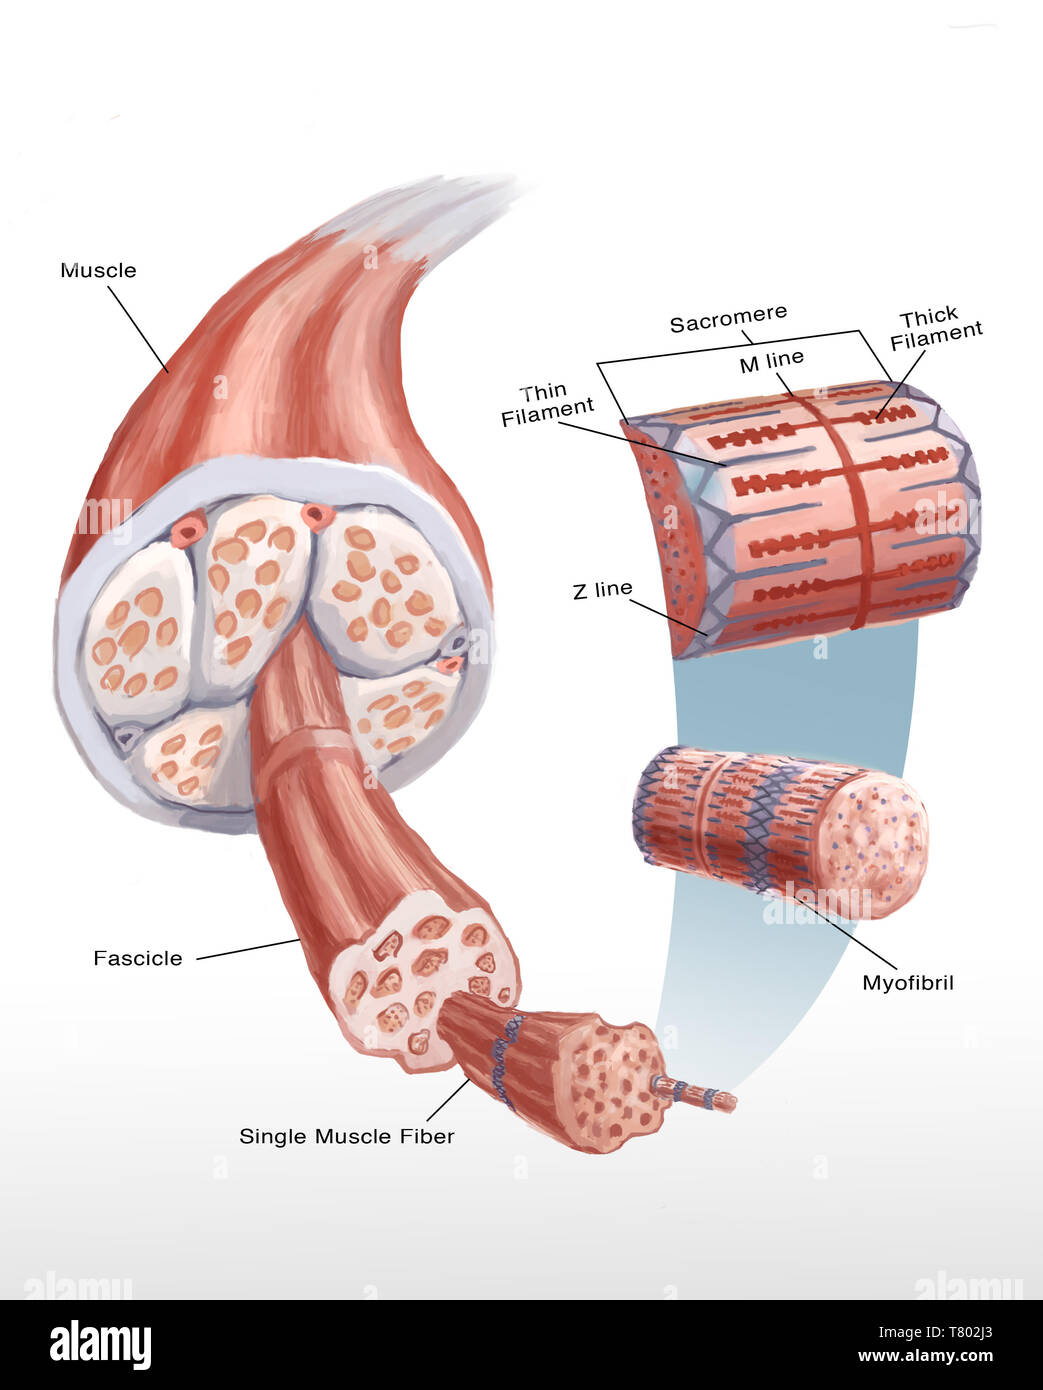 Muscle Cell, Illustration Stock Photo